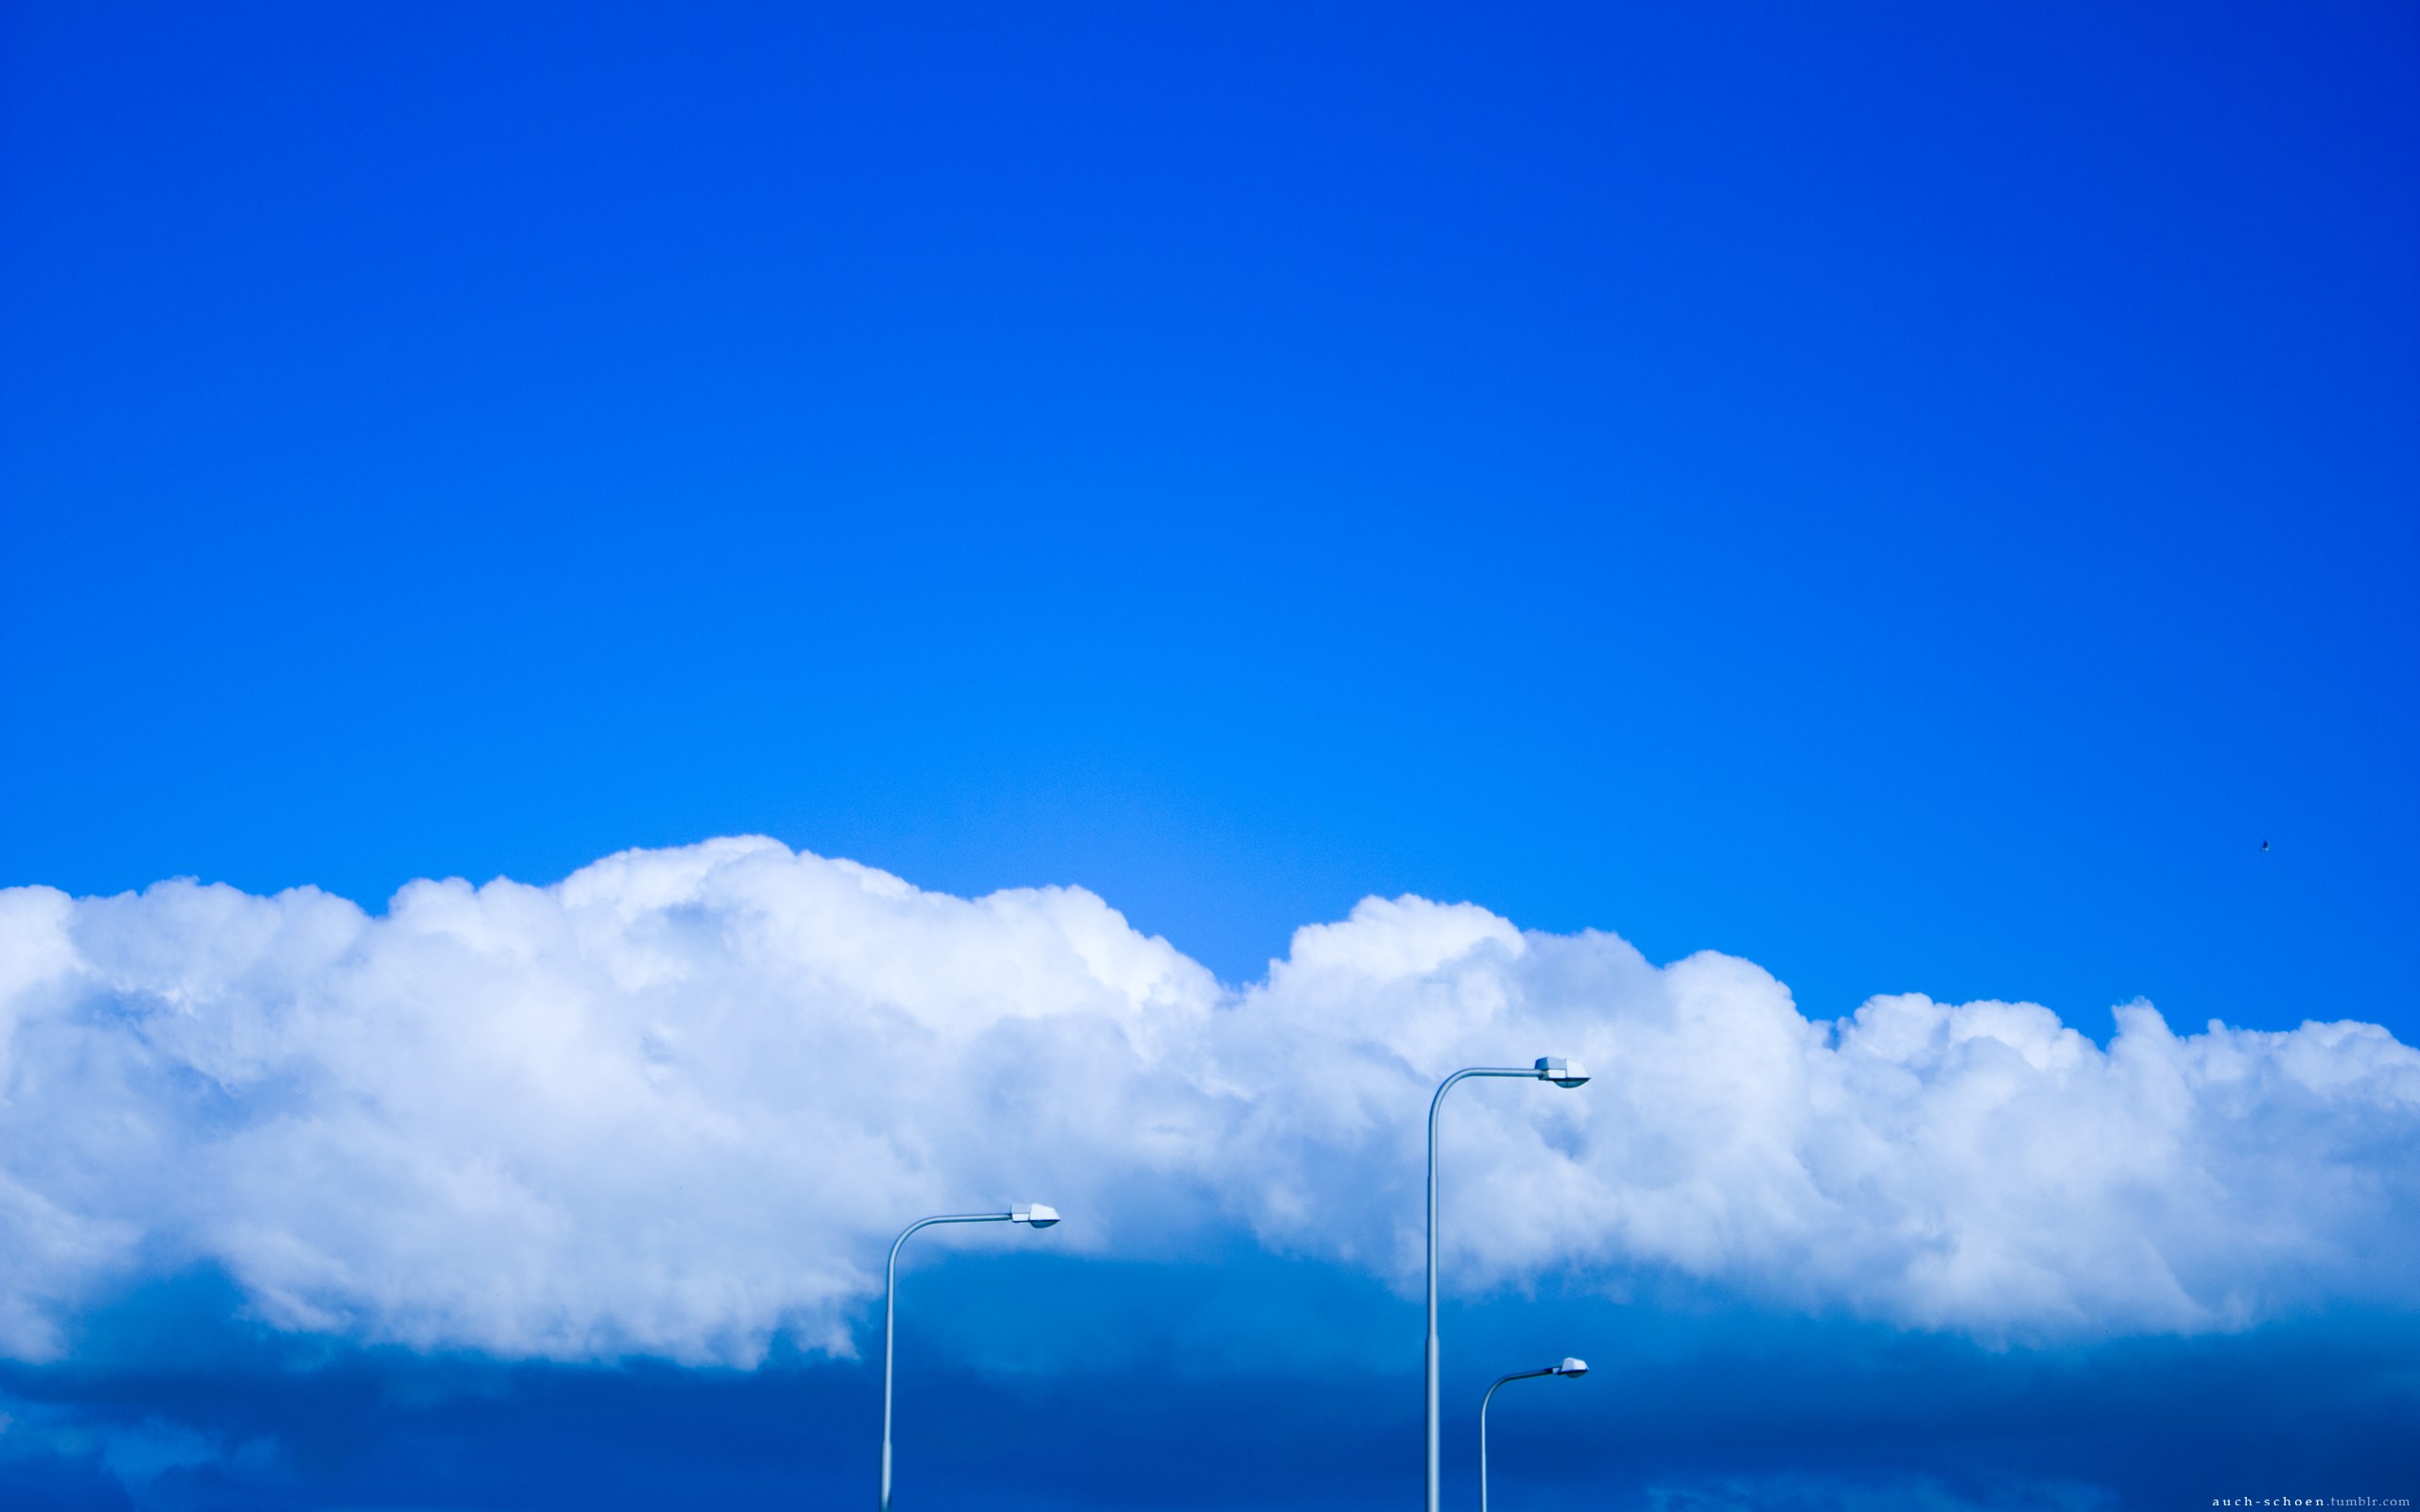 General 2560x1600 clouds skyscape street light sky outdoors